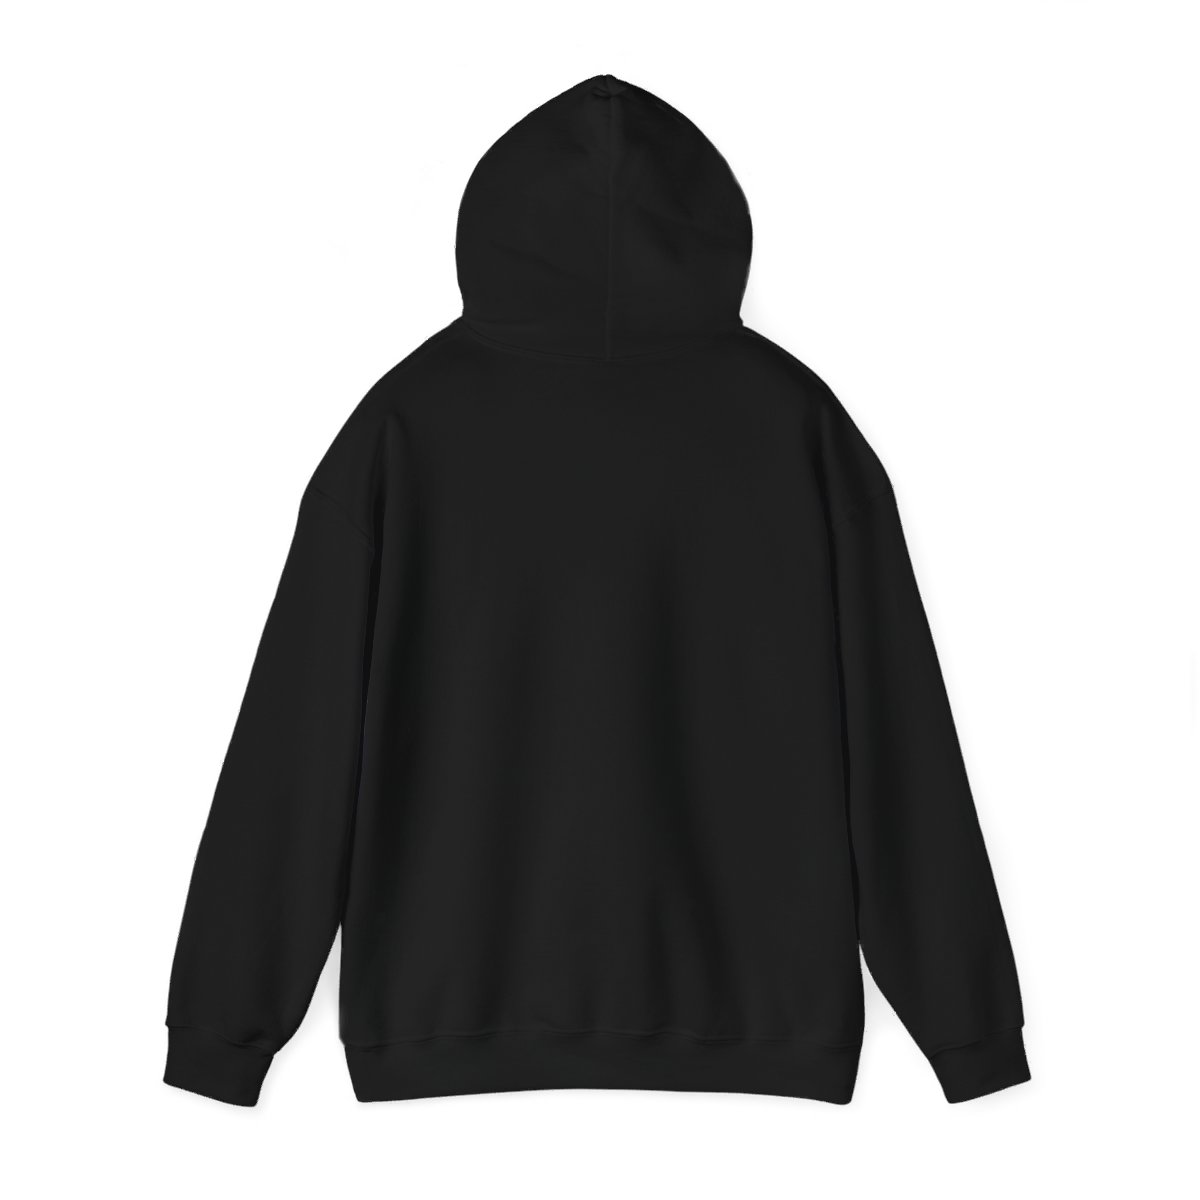 The Original Hoodie product thumbnail image